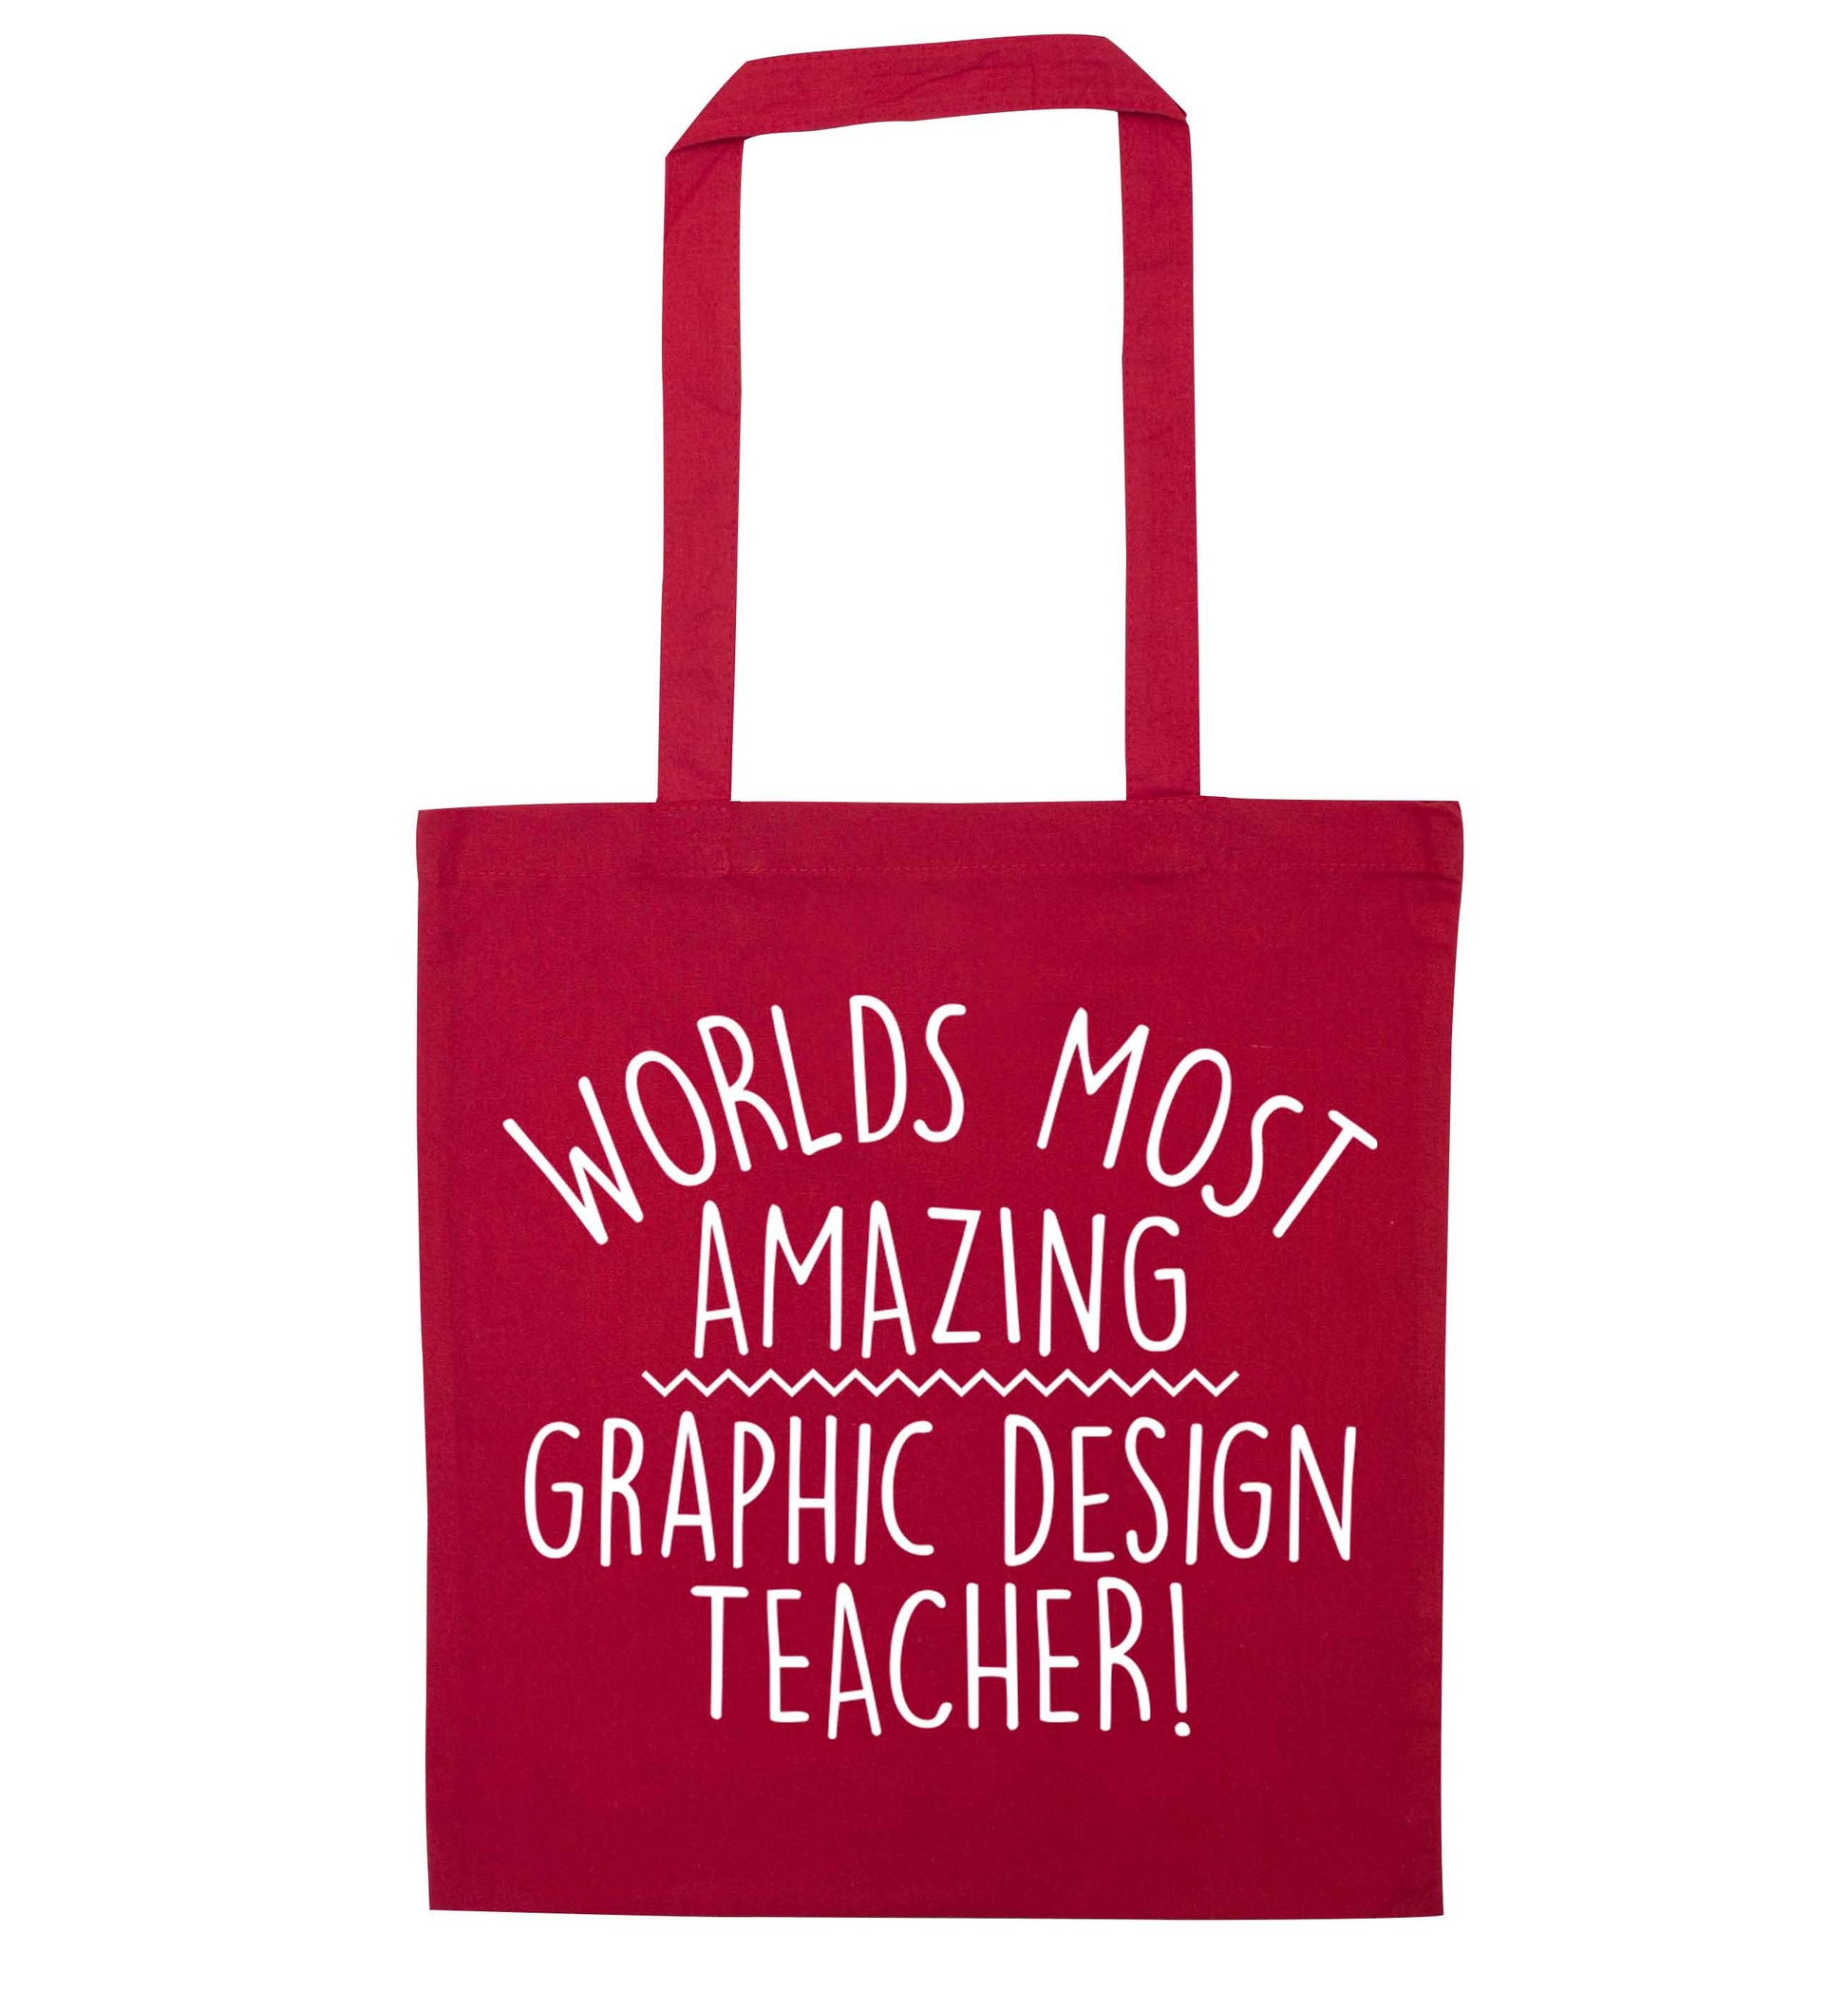 Worlds most amazing graphic design teacher red tote bag